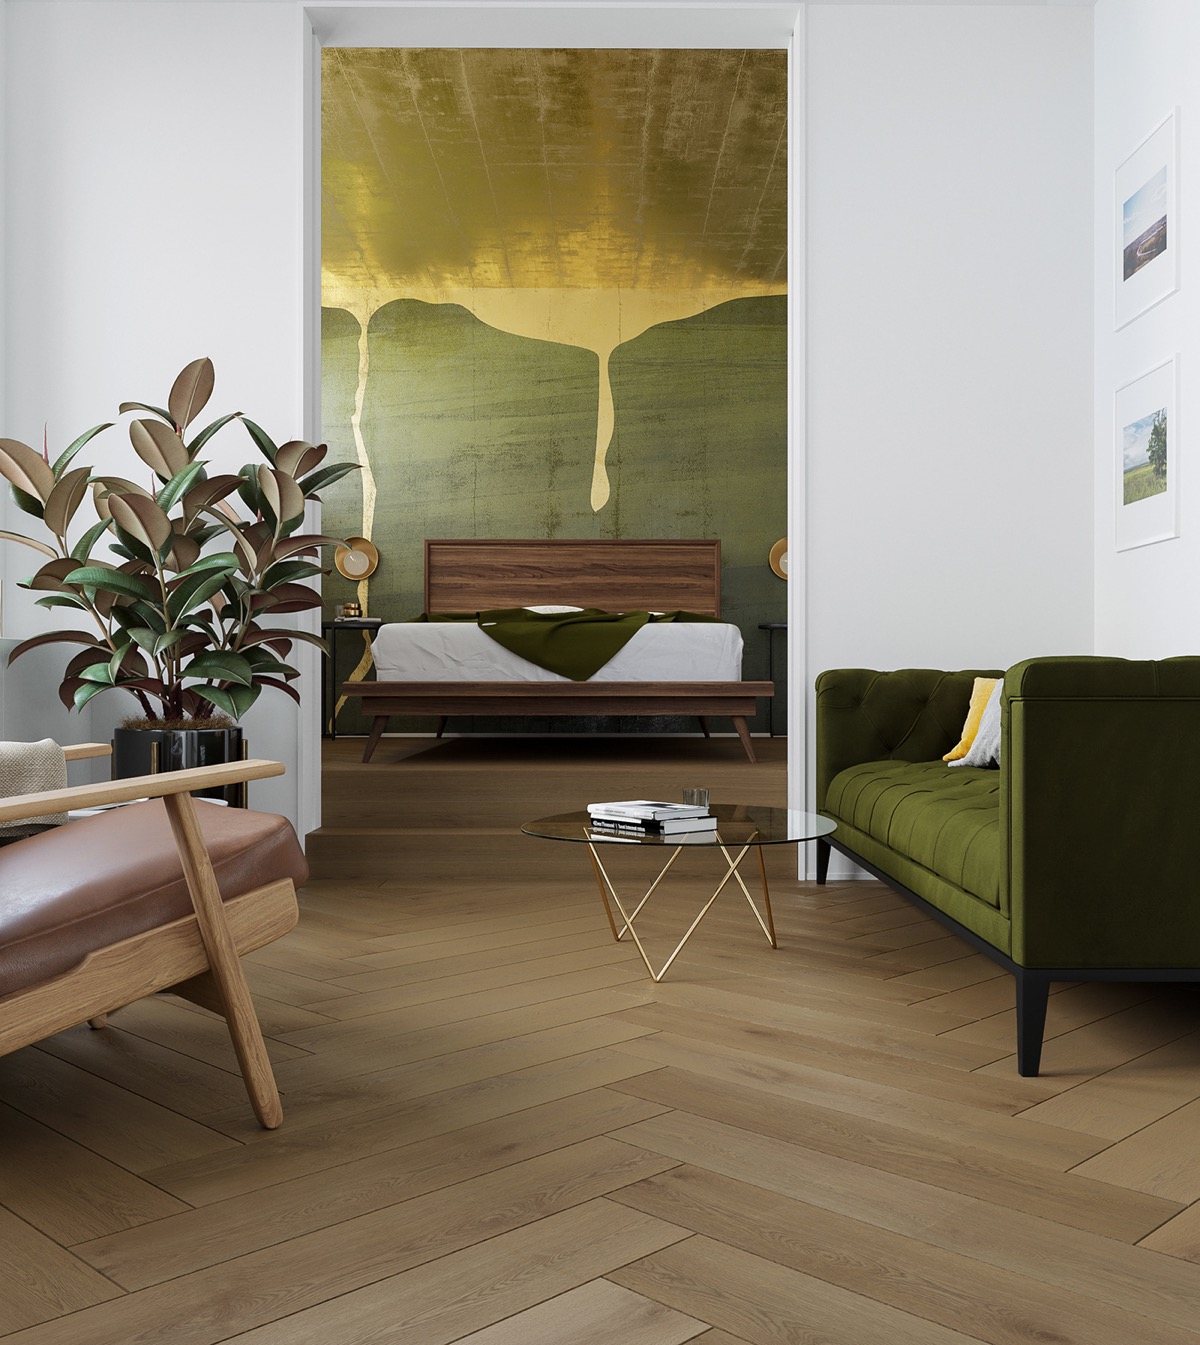 green-and-gold-bedroom-600x673.jpg